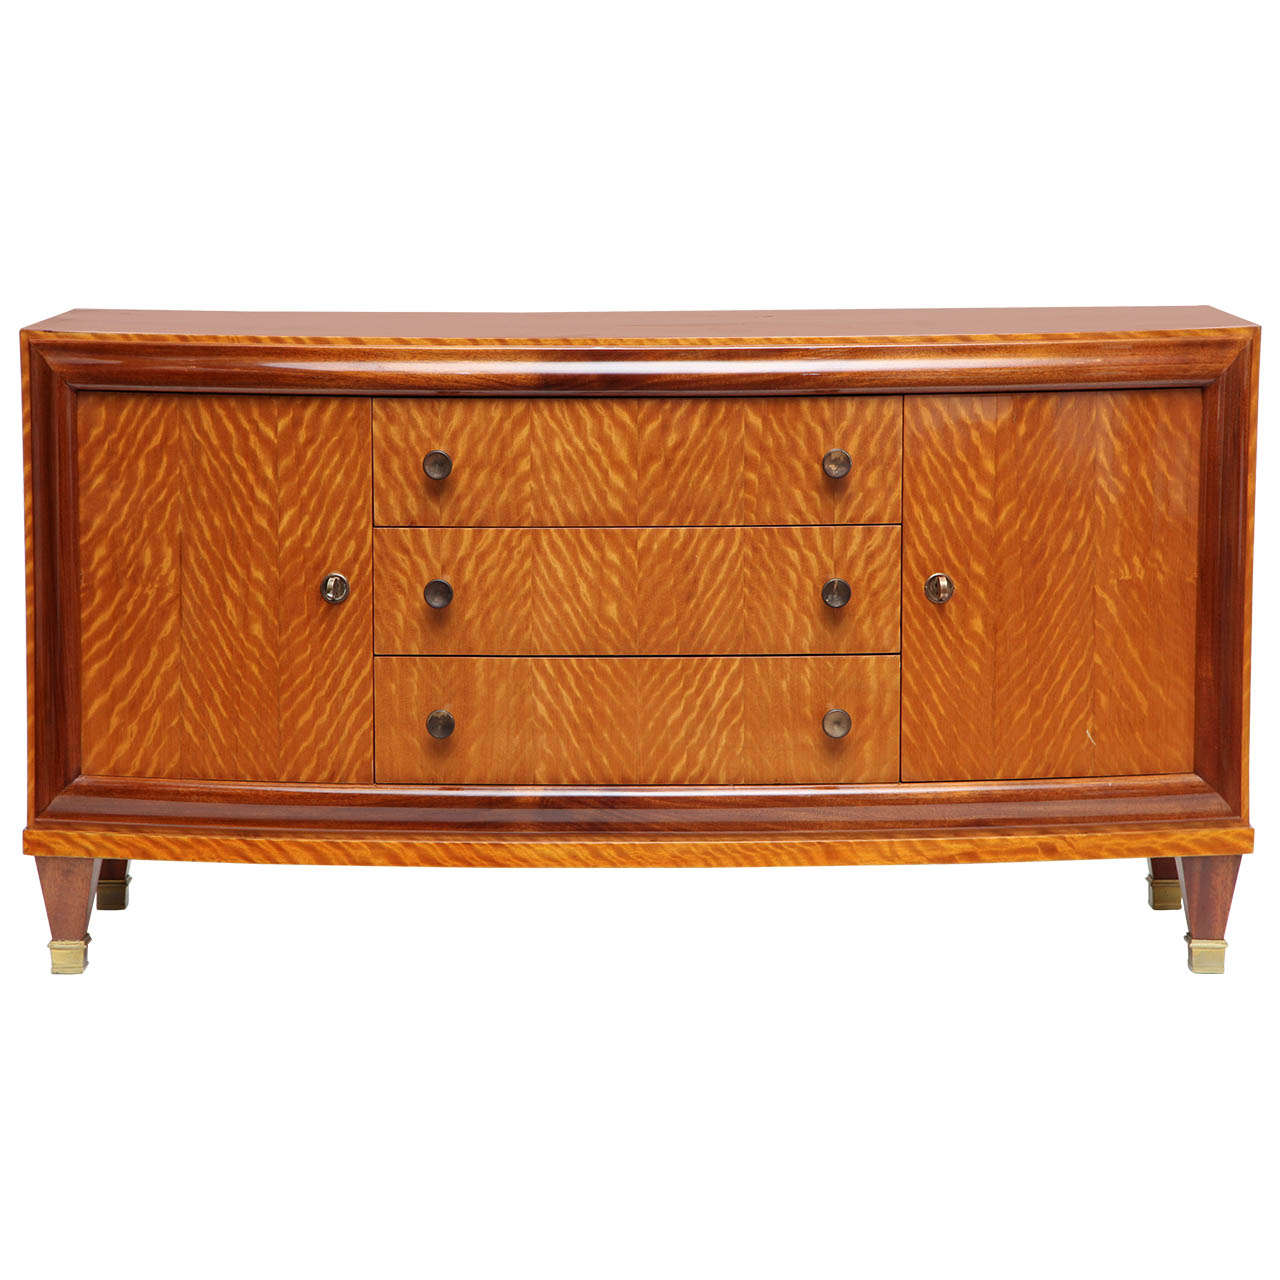 Art Deco Bow Front Cabinet in Mahogany